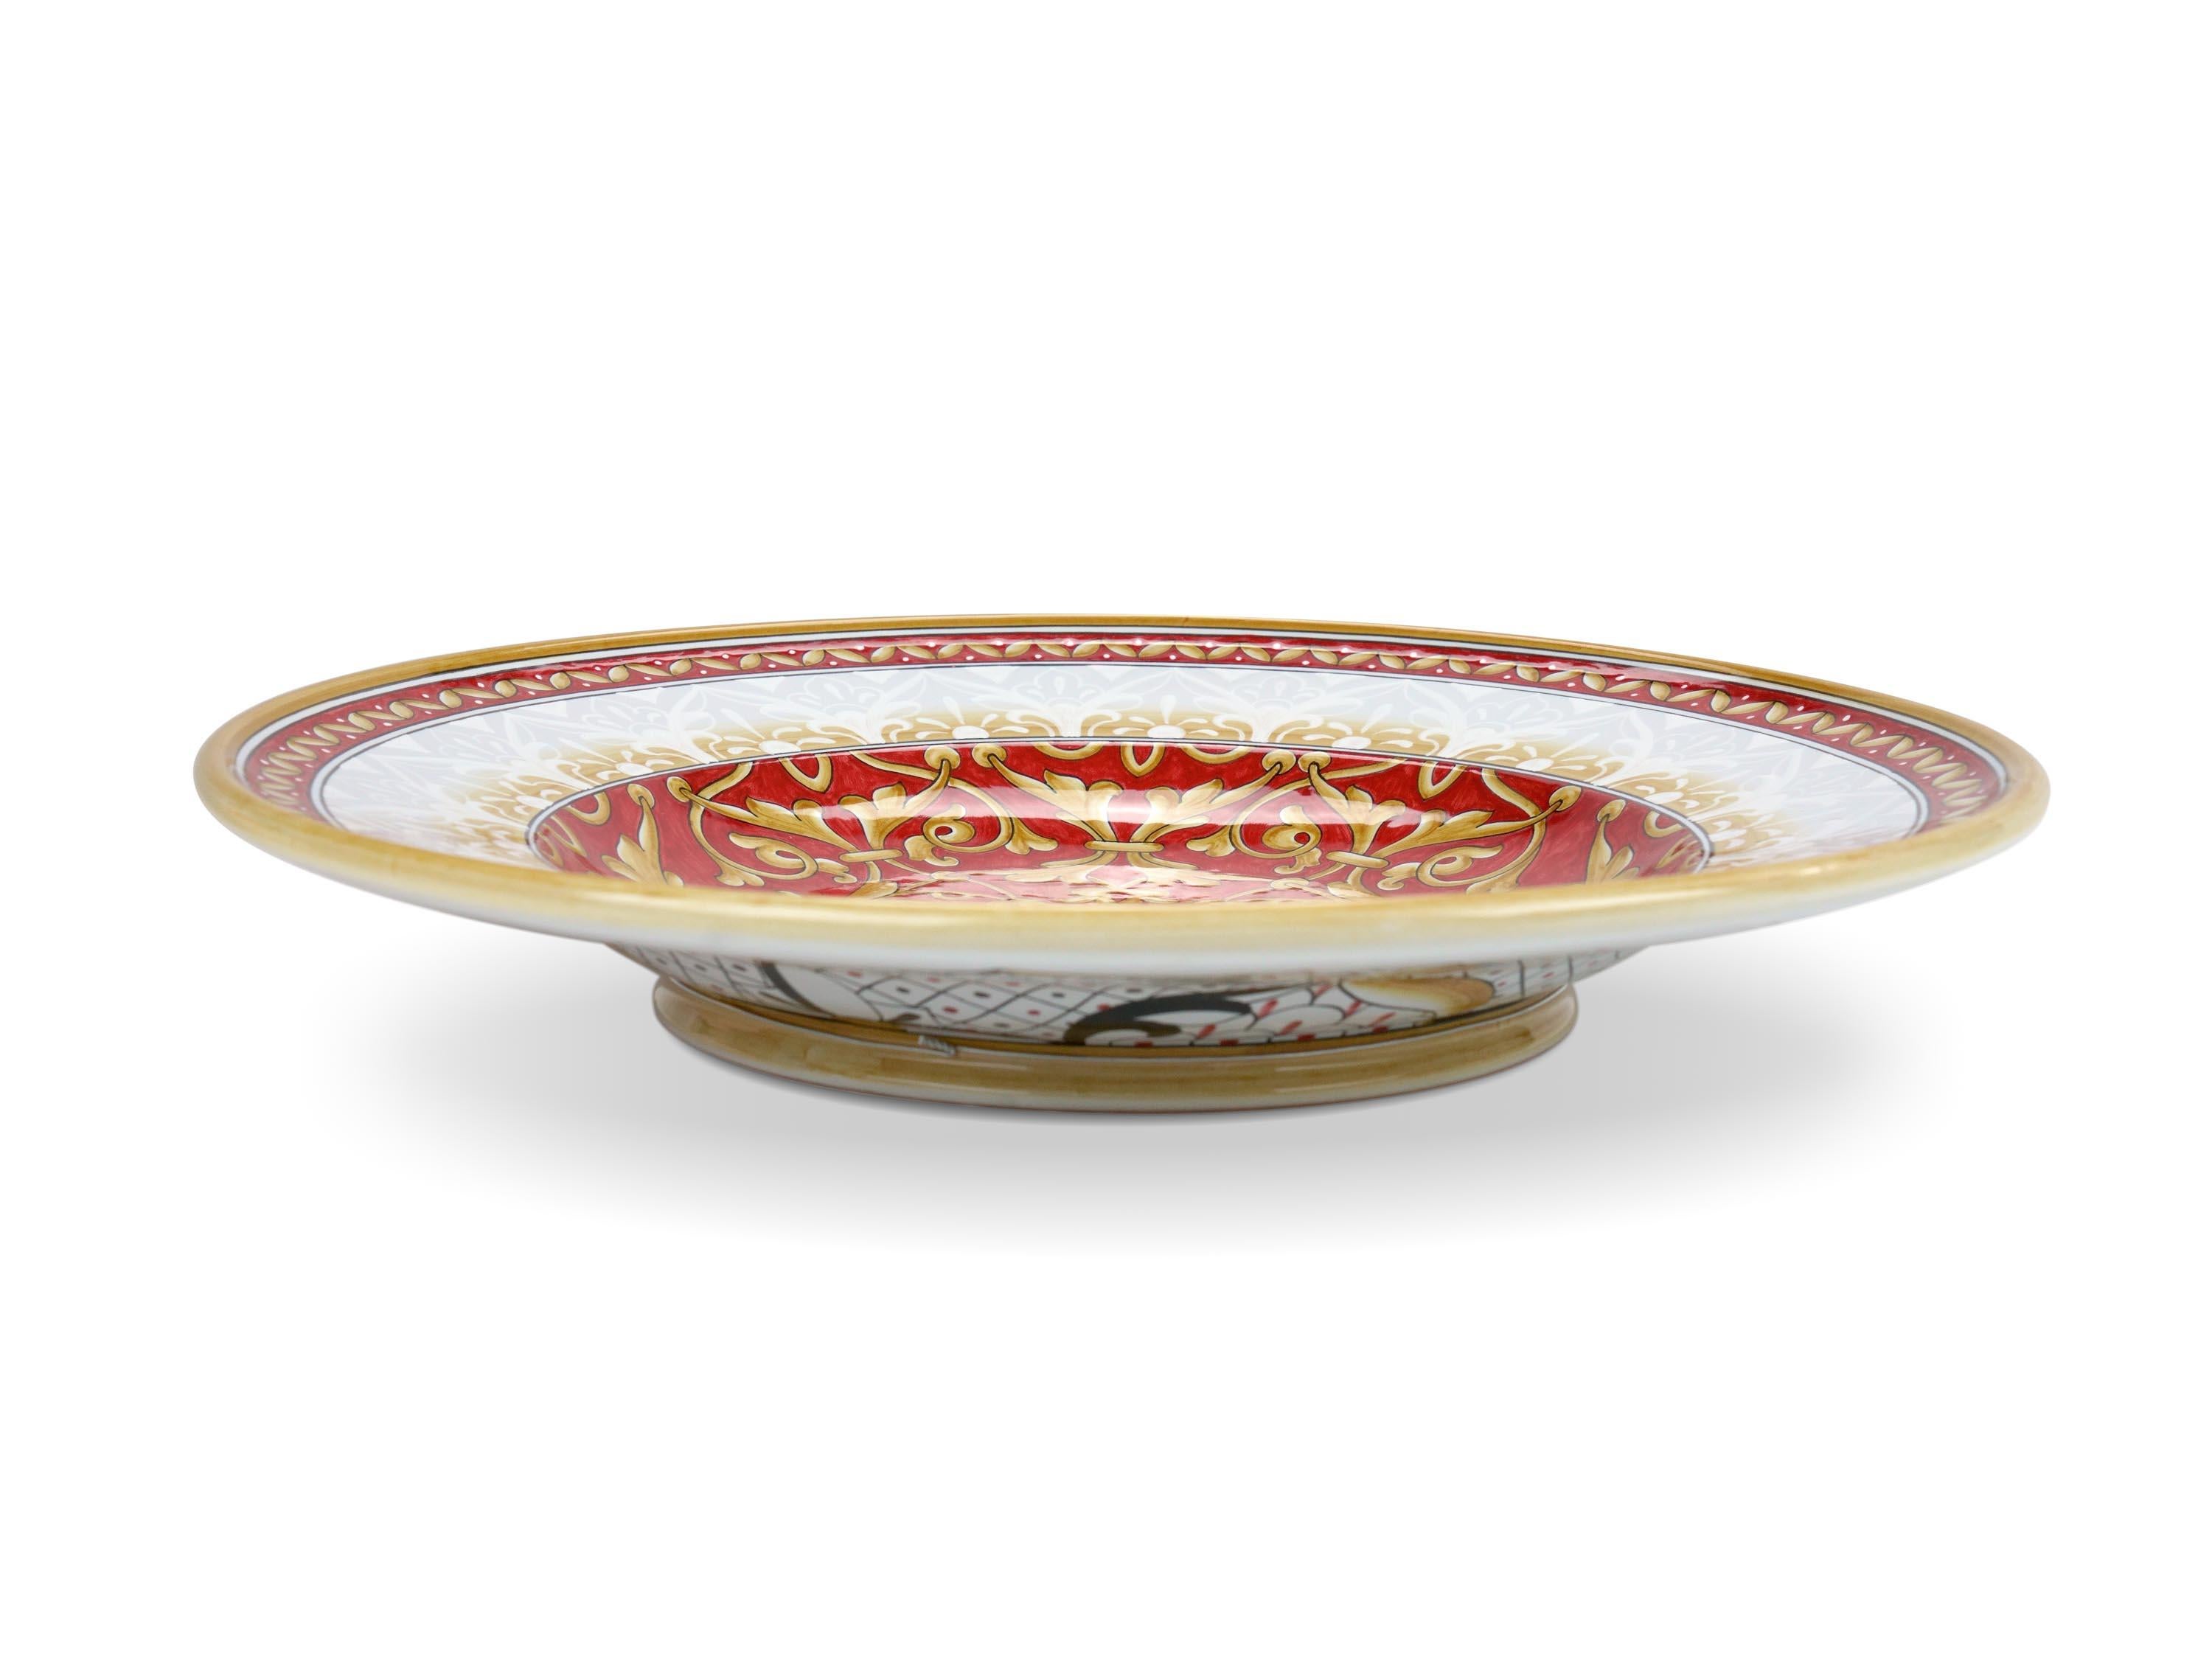 This exclusive ceramic plate is handmade and hand-painted in Italy following the original Renaissance painting technique, unchanged over time, which we observe to the letter: it is decorated in majolica painted in duotone of red and golden yellow